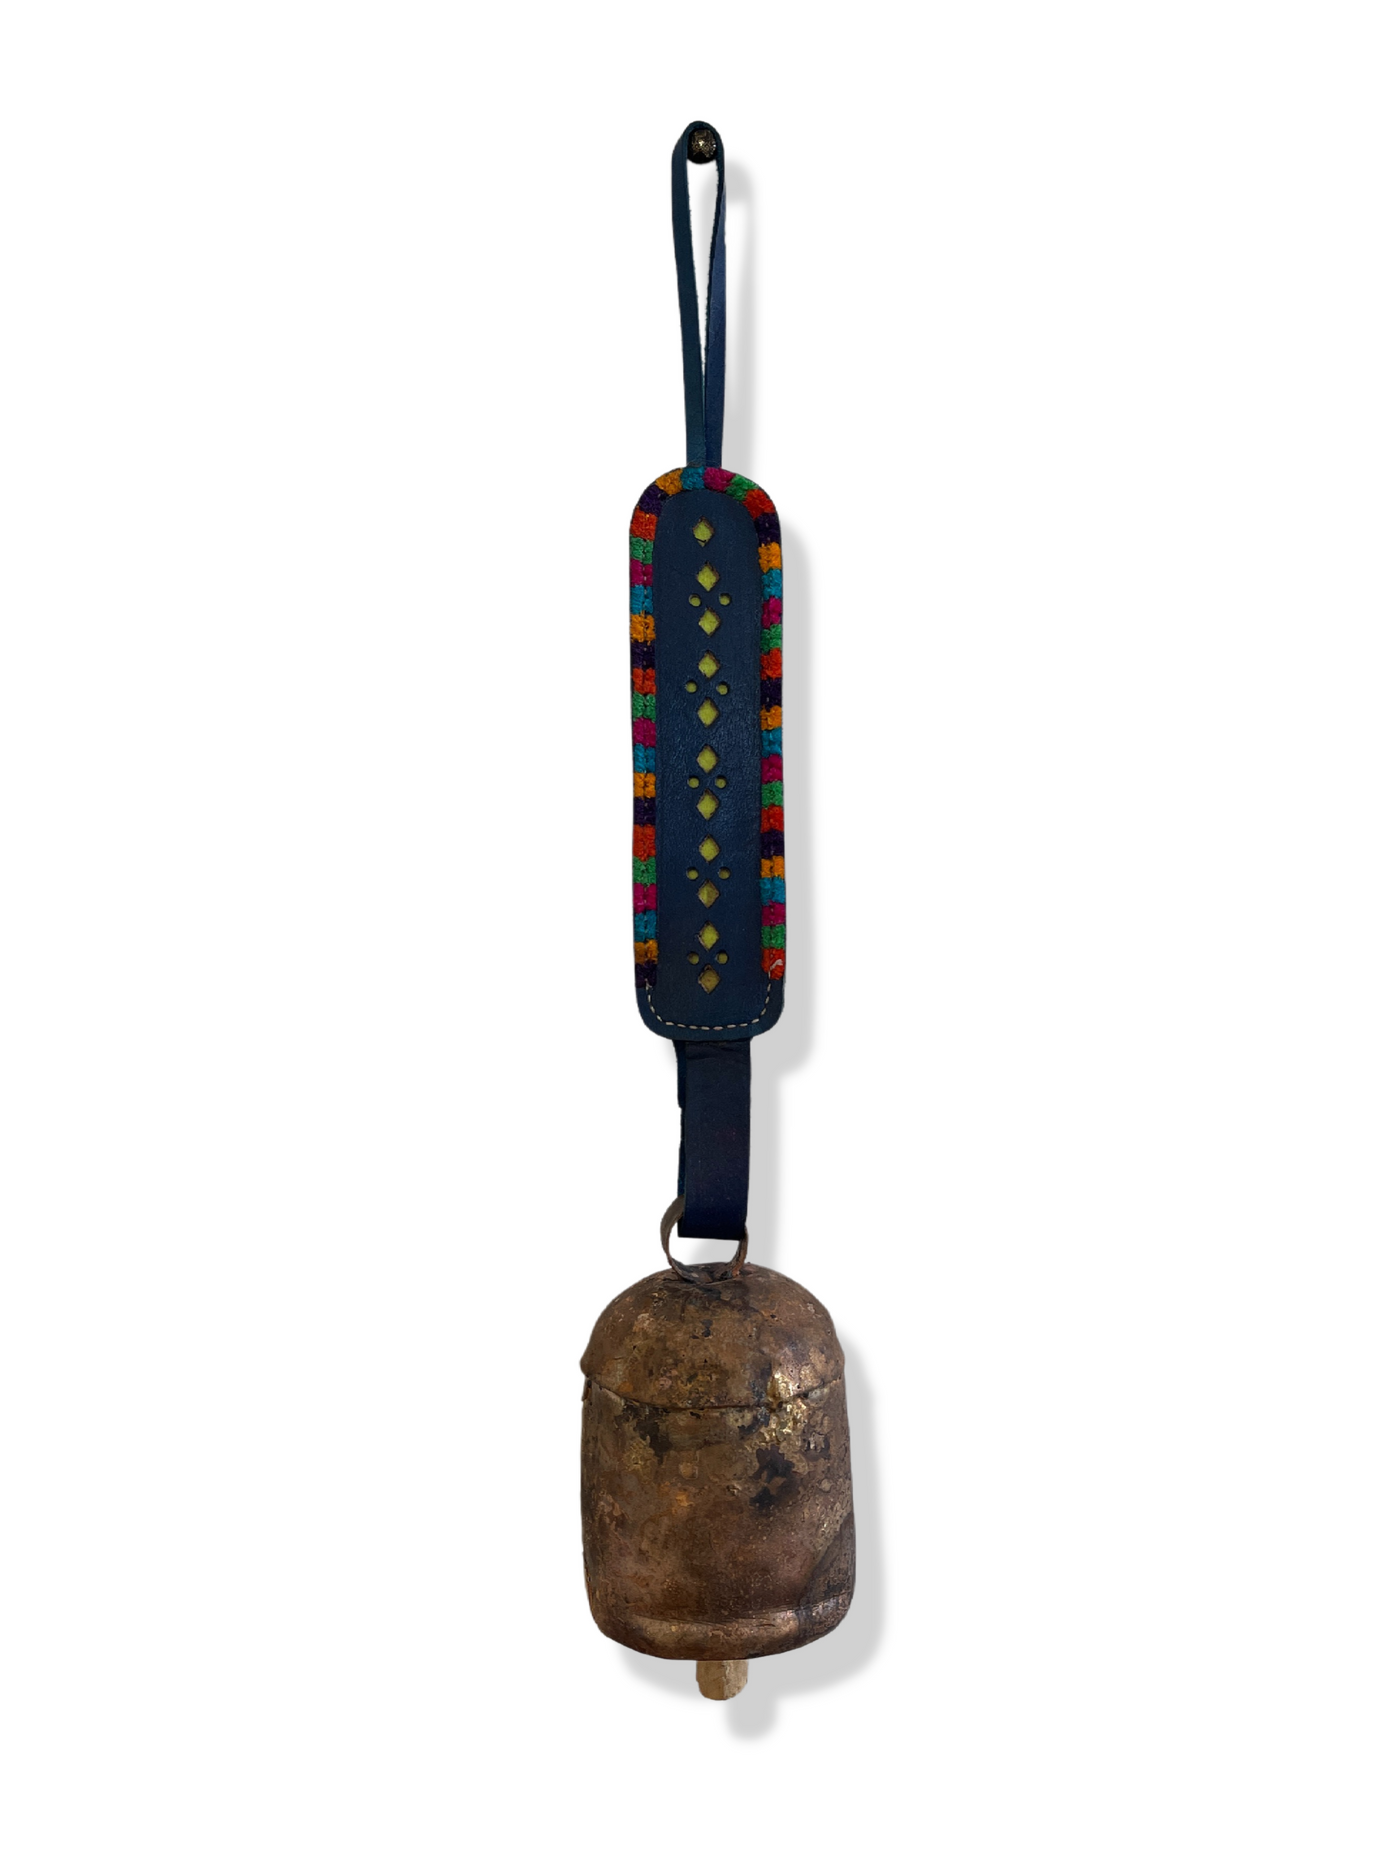 5" Copper Bell with Leather Hanger